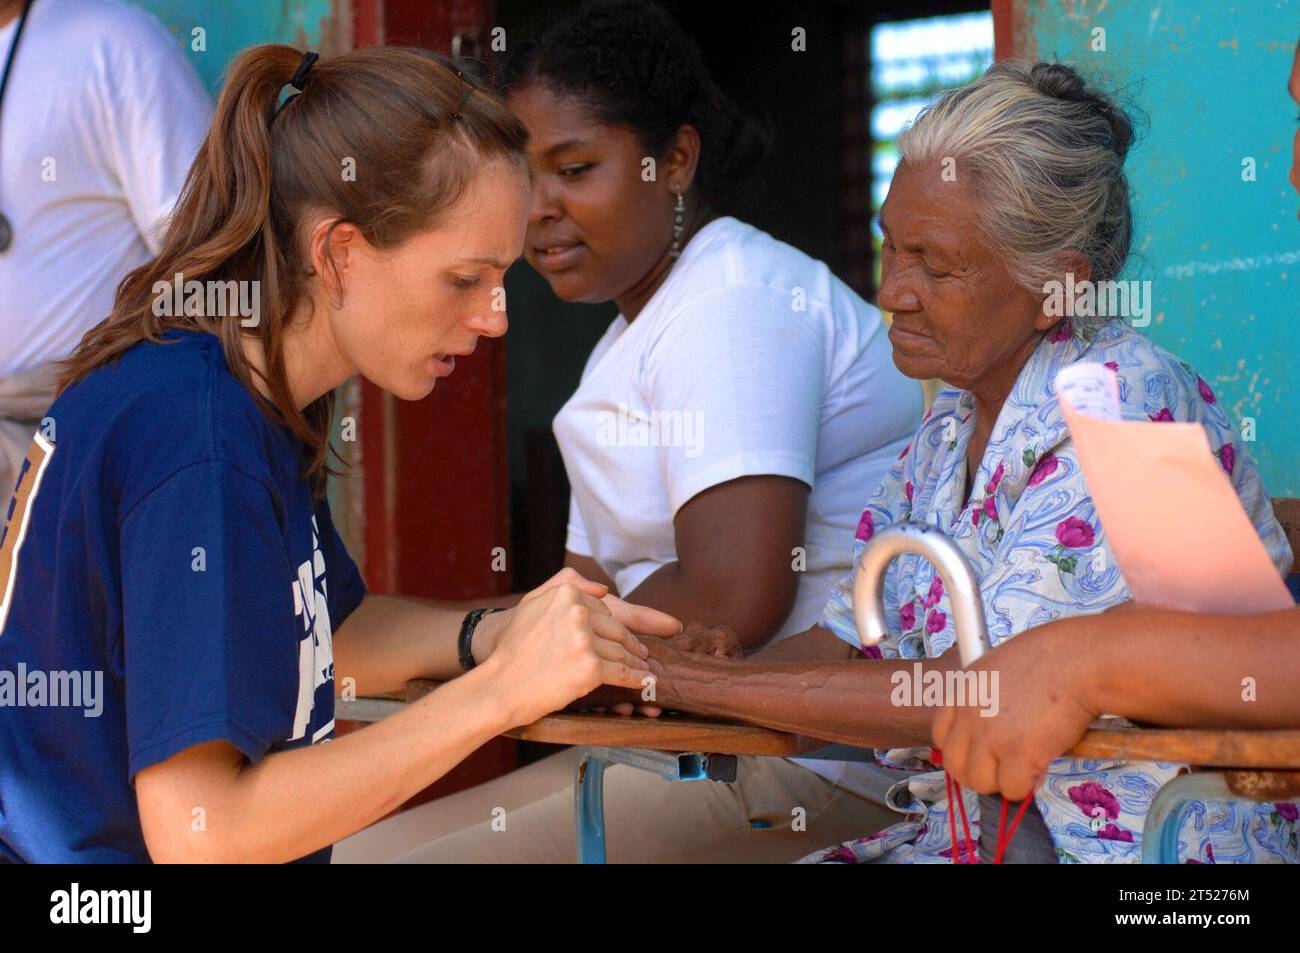 0808157540C-148 PUERTO CABEZAS, Nicaragua (Aug.15, 2008) Project Hope volunteer Sara Joyce, embarked aboard the amphibious assault ship USS Kearsarge (LHD 3), examines the hand of an elderly Nicaraguan woman at a medical clinic at Juan Comenius High School during a Continuing Promise 2008 humanitarian assistance project. Kearsarge is the primary platform for the Caribbean phase of Continuing Promise, an equal-partnership mission involving the United States, Canada, the Netherlands, Brazil, Nicaragua, Panama, Colombia, Dominican Republic, Trinidad and Tobago and Guyana. Navy Stock Photo